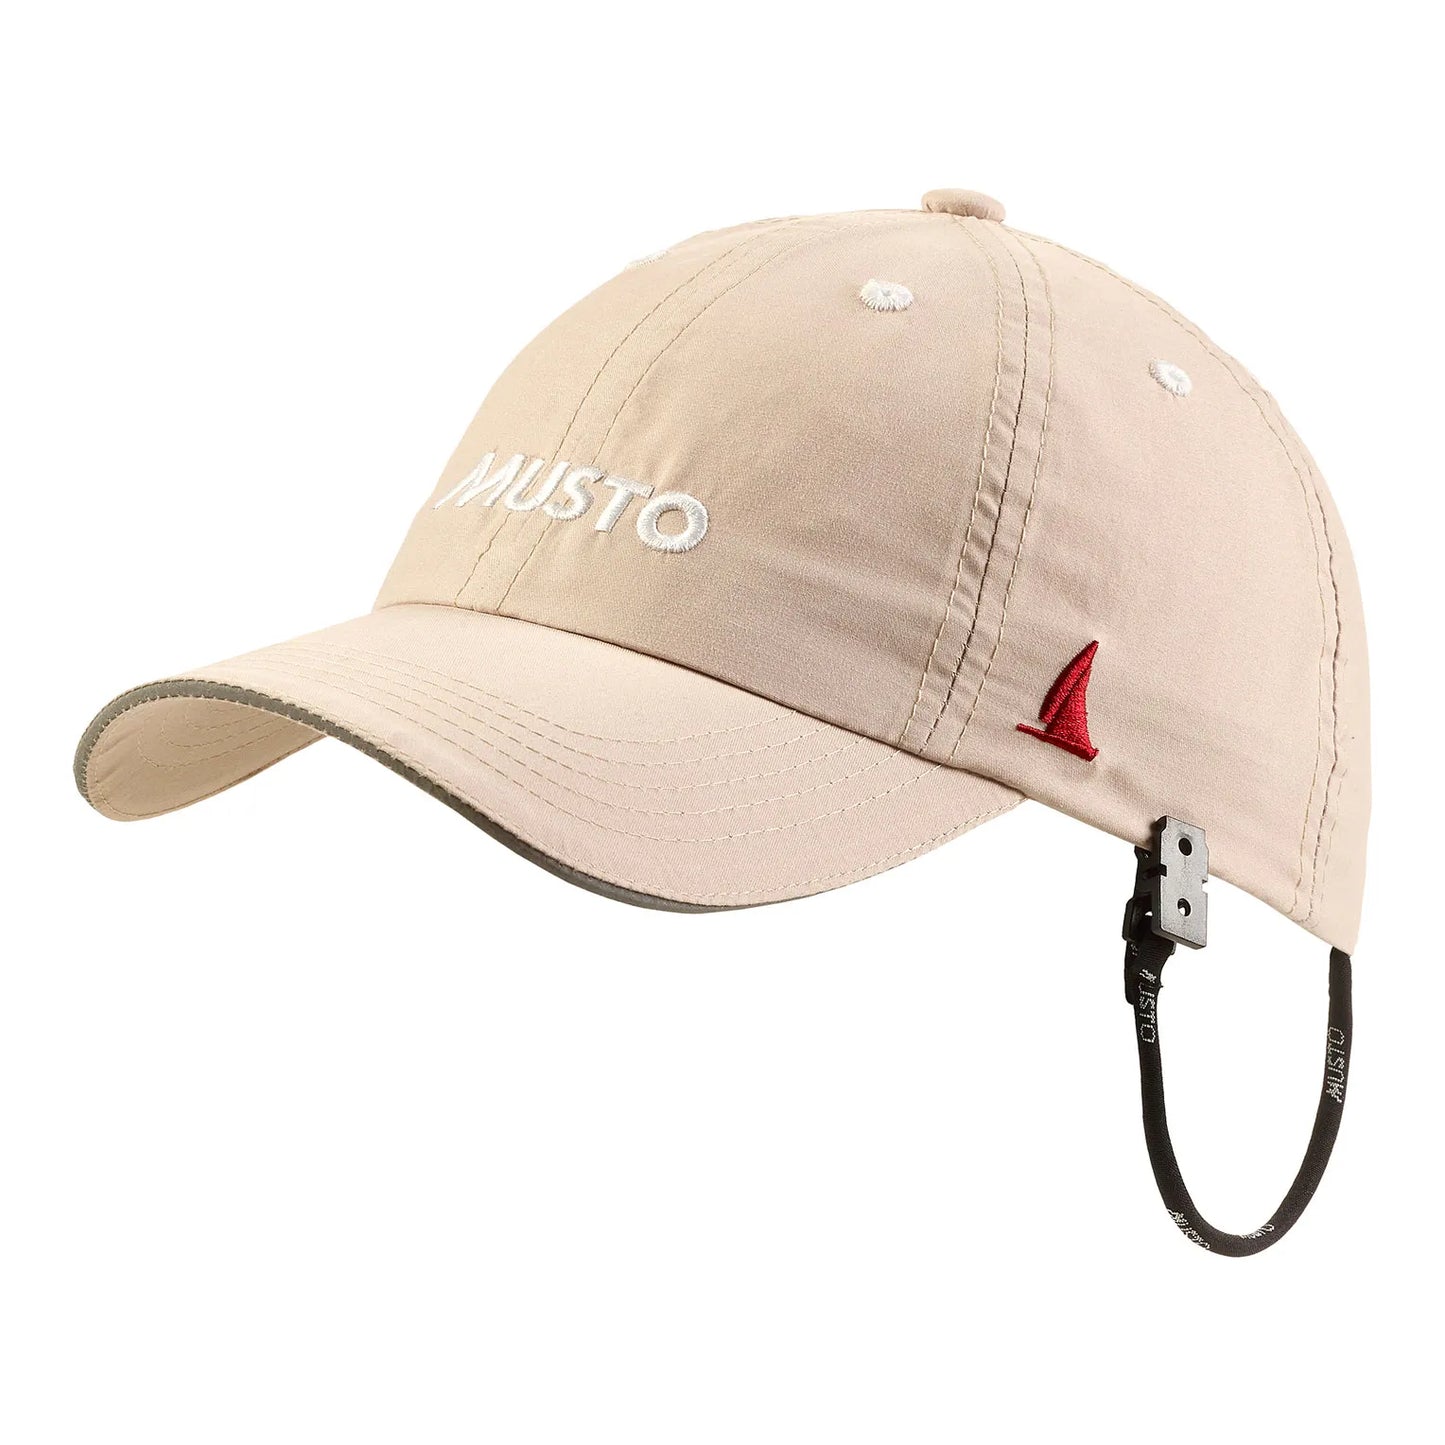 Fast Dry Musto Cap, Light Stone with X-Yachts logo